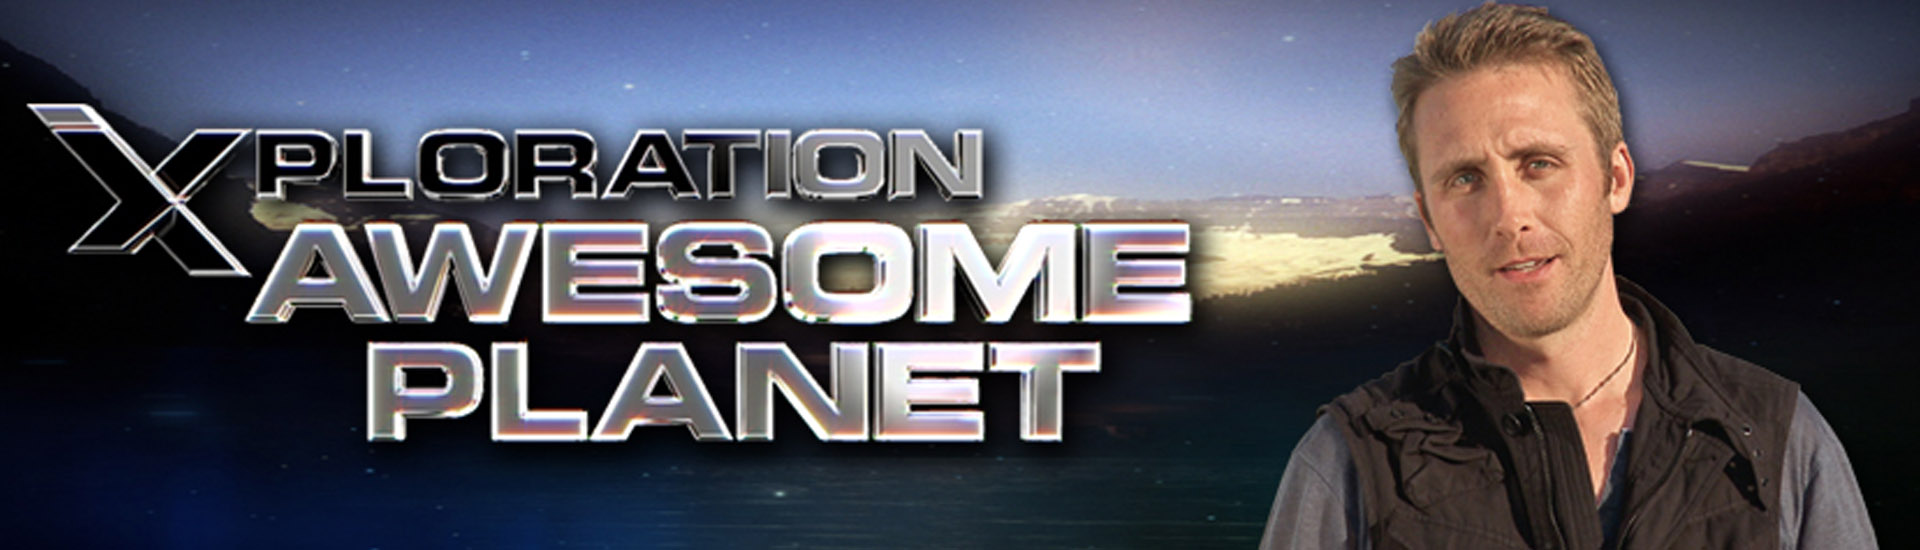 Banner image for Xploration Awesome Planet